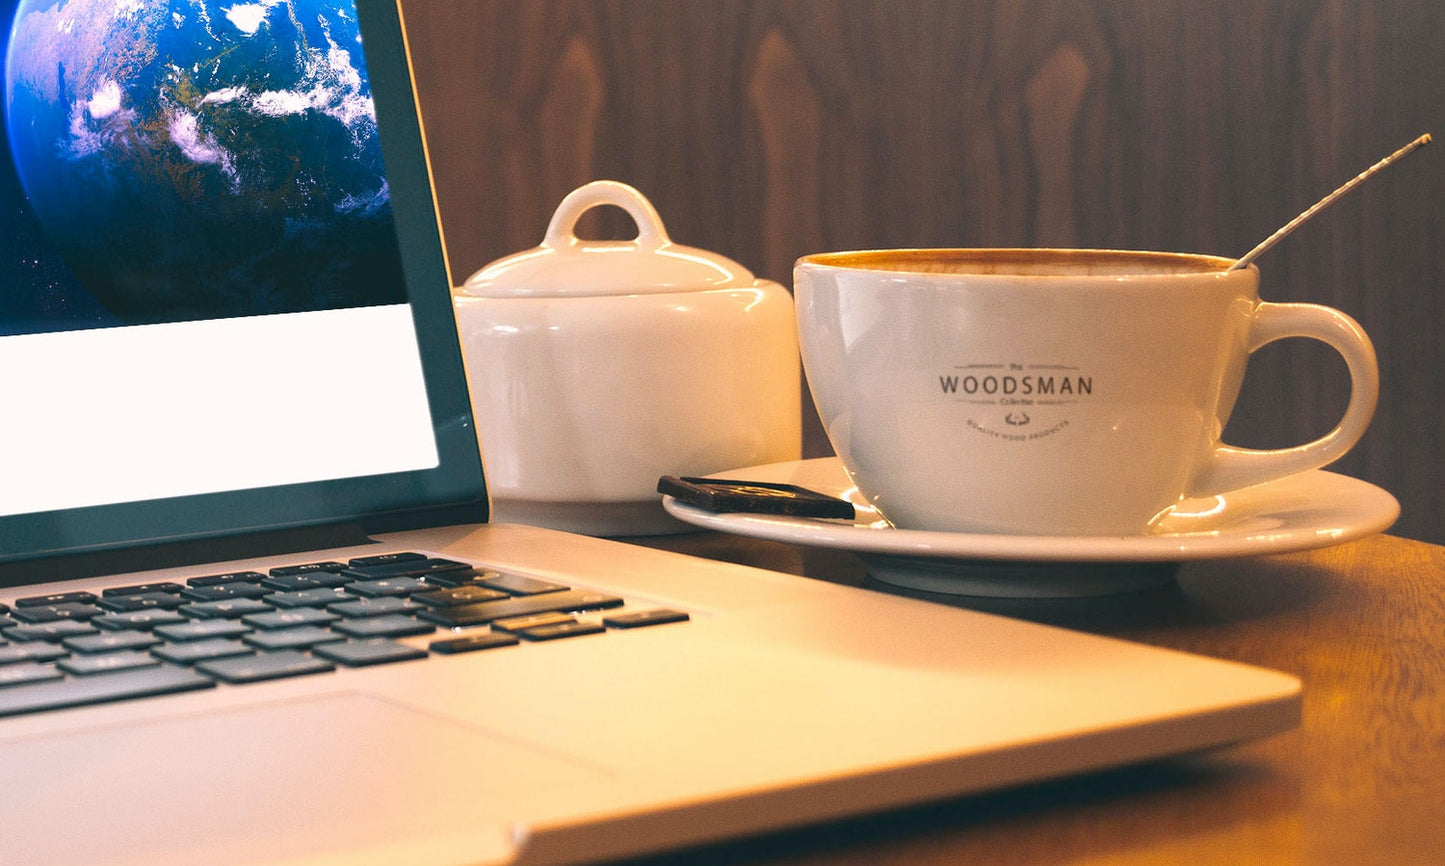 Free Macbook Pro And Coffee Cup Mockup